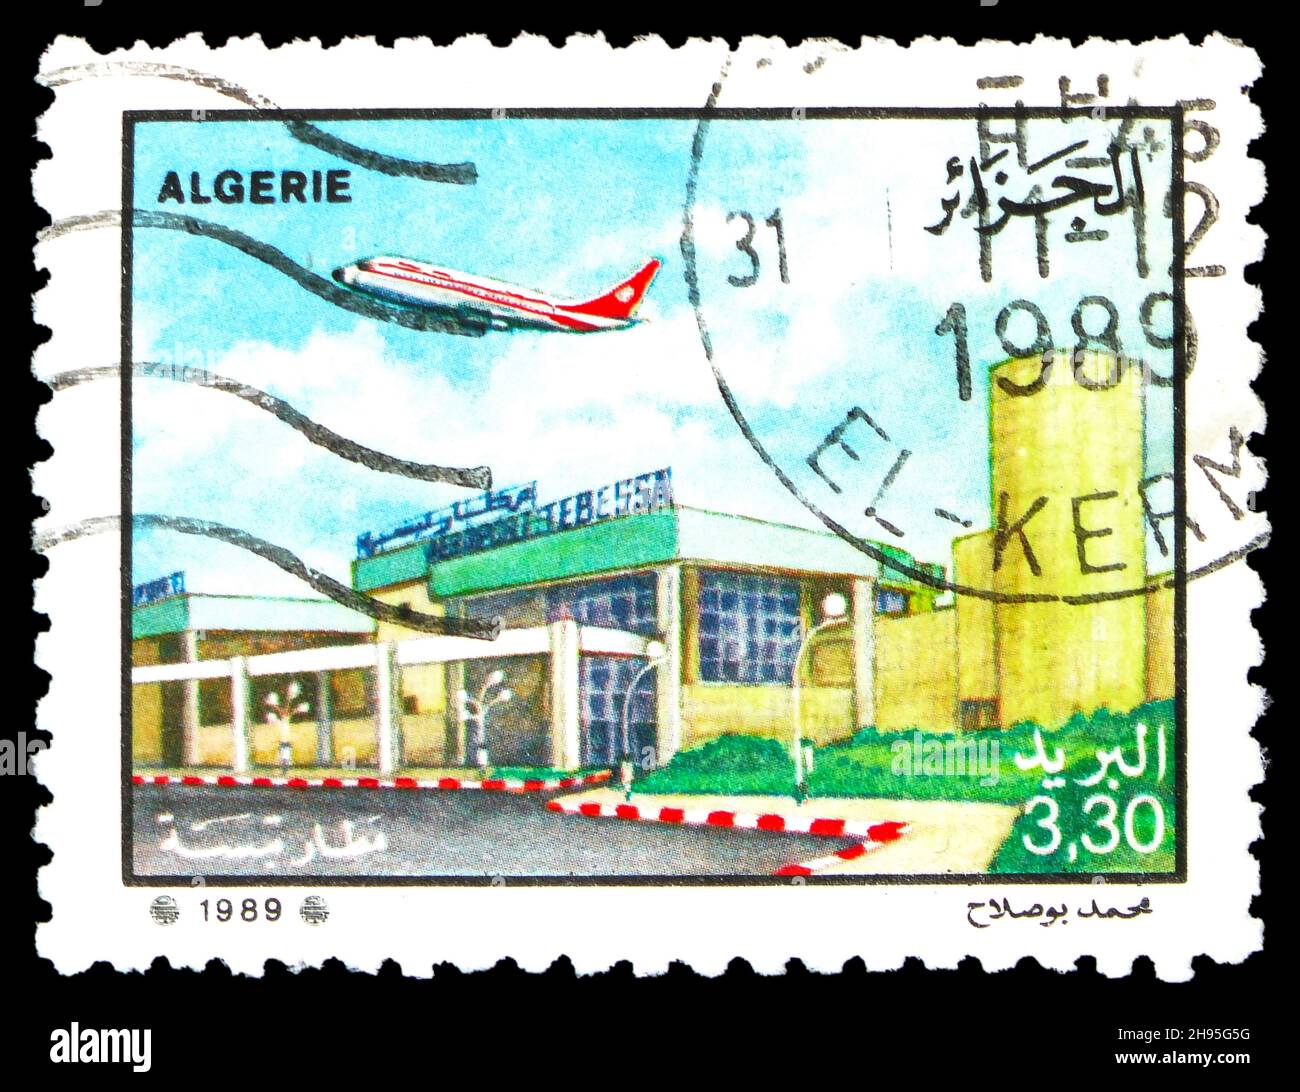 MOSCOW, RUSSIA - OCTOBER 24, 2021: Postage stamp printed in Algeria shows Tebessa, Algerian Airports serie, circa 1989 Stock Photo